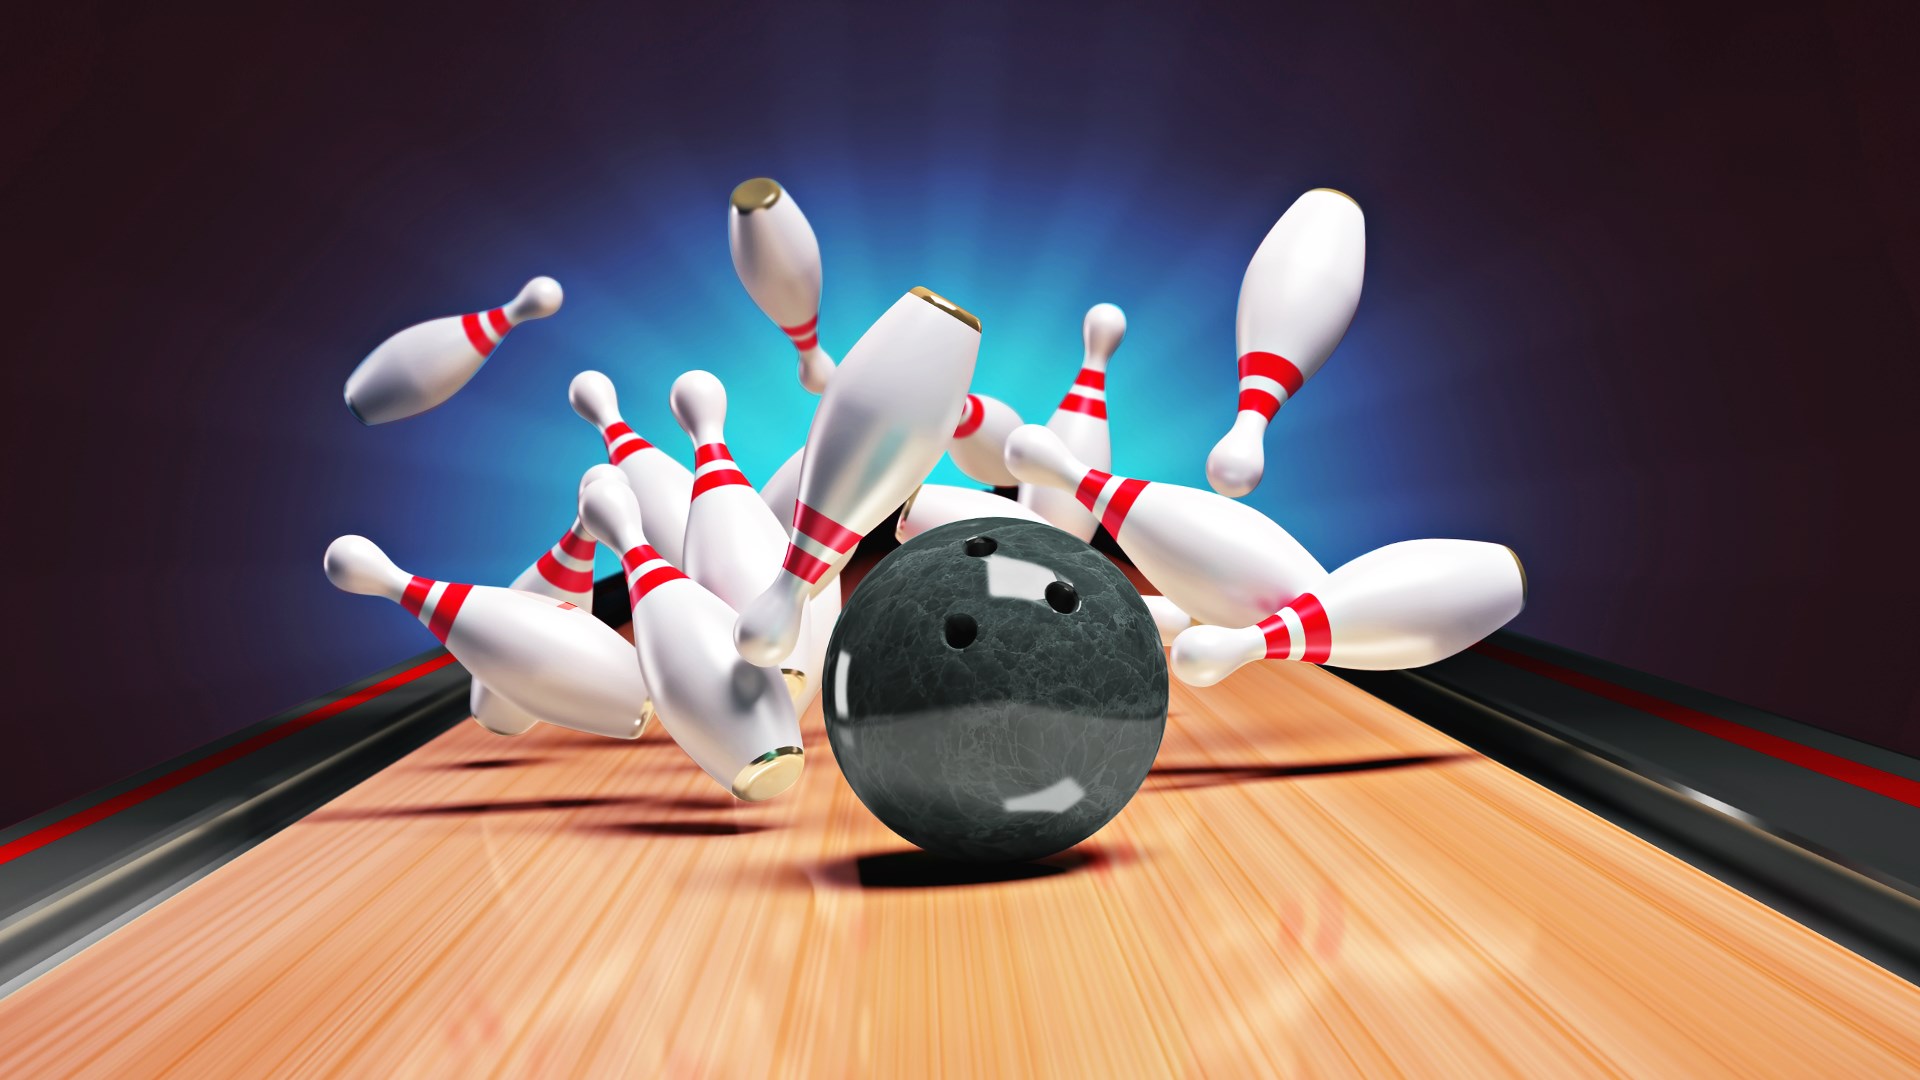 Bowling Ball Comparisons: Strike Your Best Match!